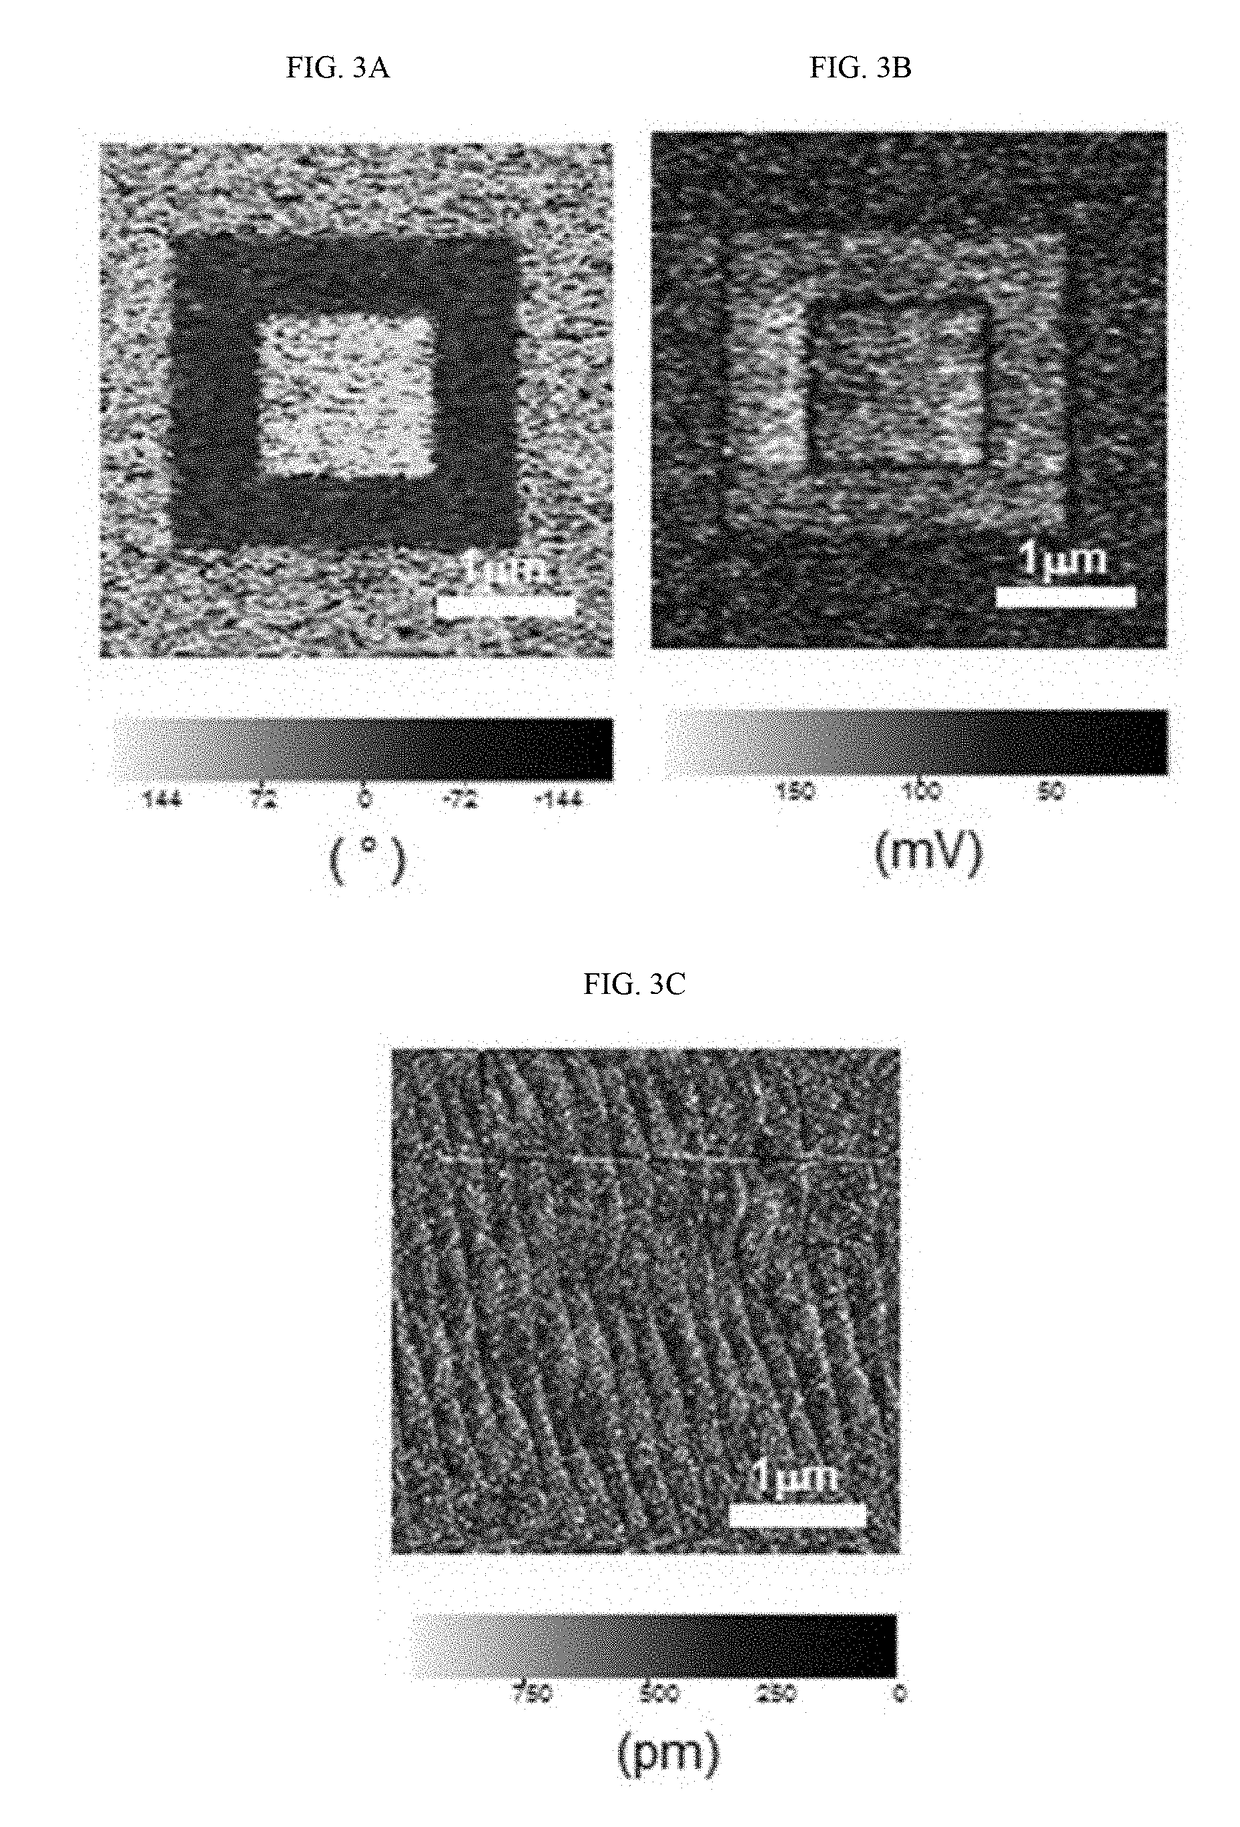 Selectively activated synaptic device with ultrasmall dimension and low power consumption